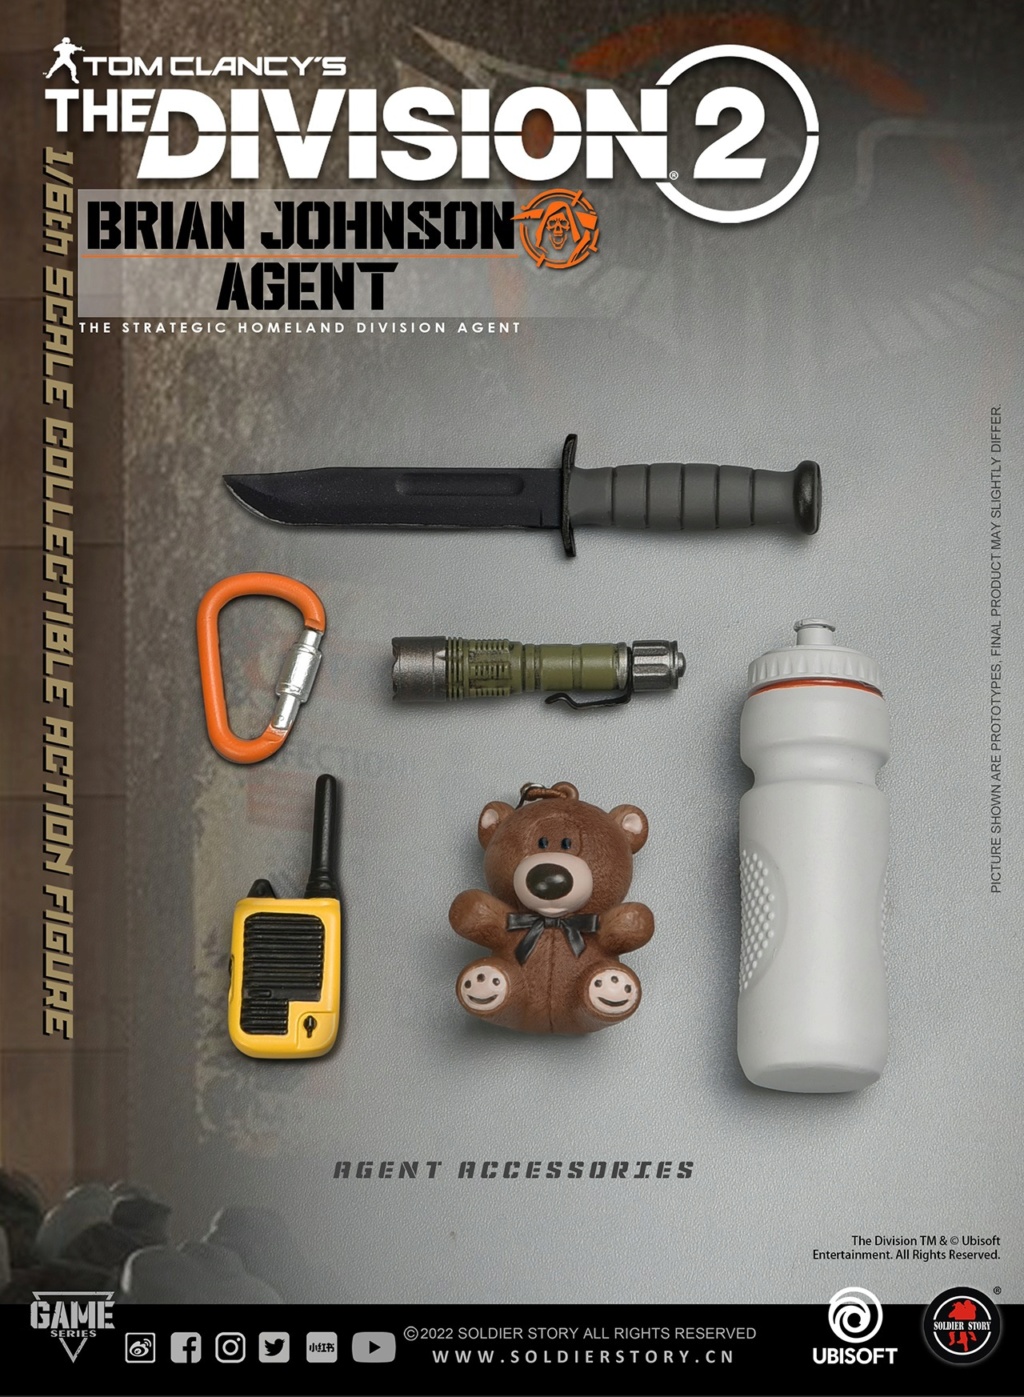 NEW PRODUCT: Soldierstory: 1/6 Tom Clancy's The Division 2 - Agent Brian Johnson Universal/Deluxe SSG-005/006 22230210